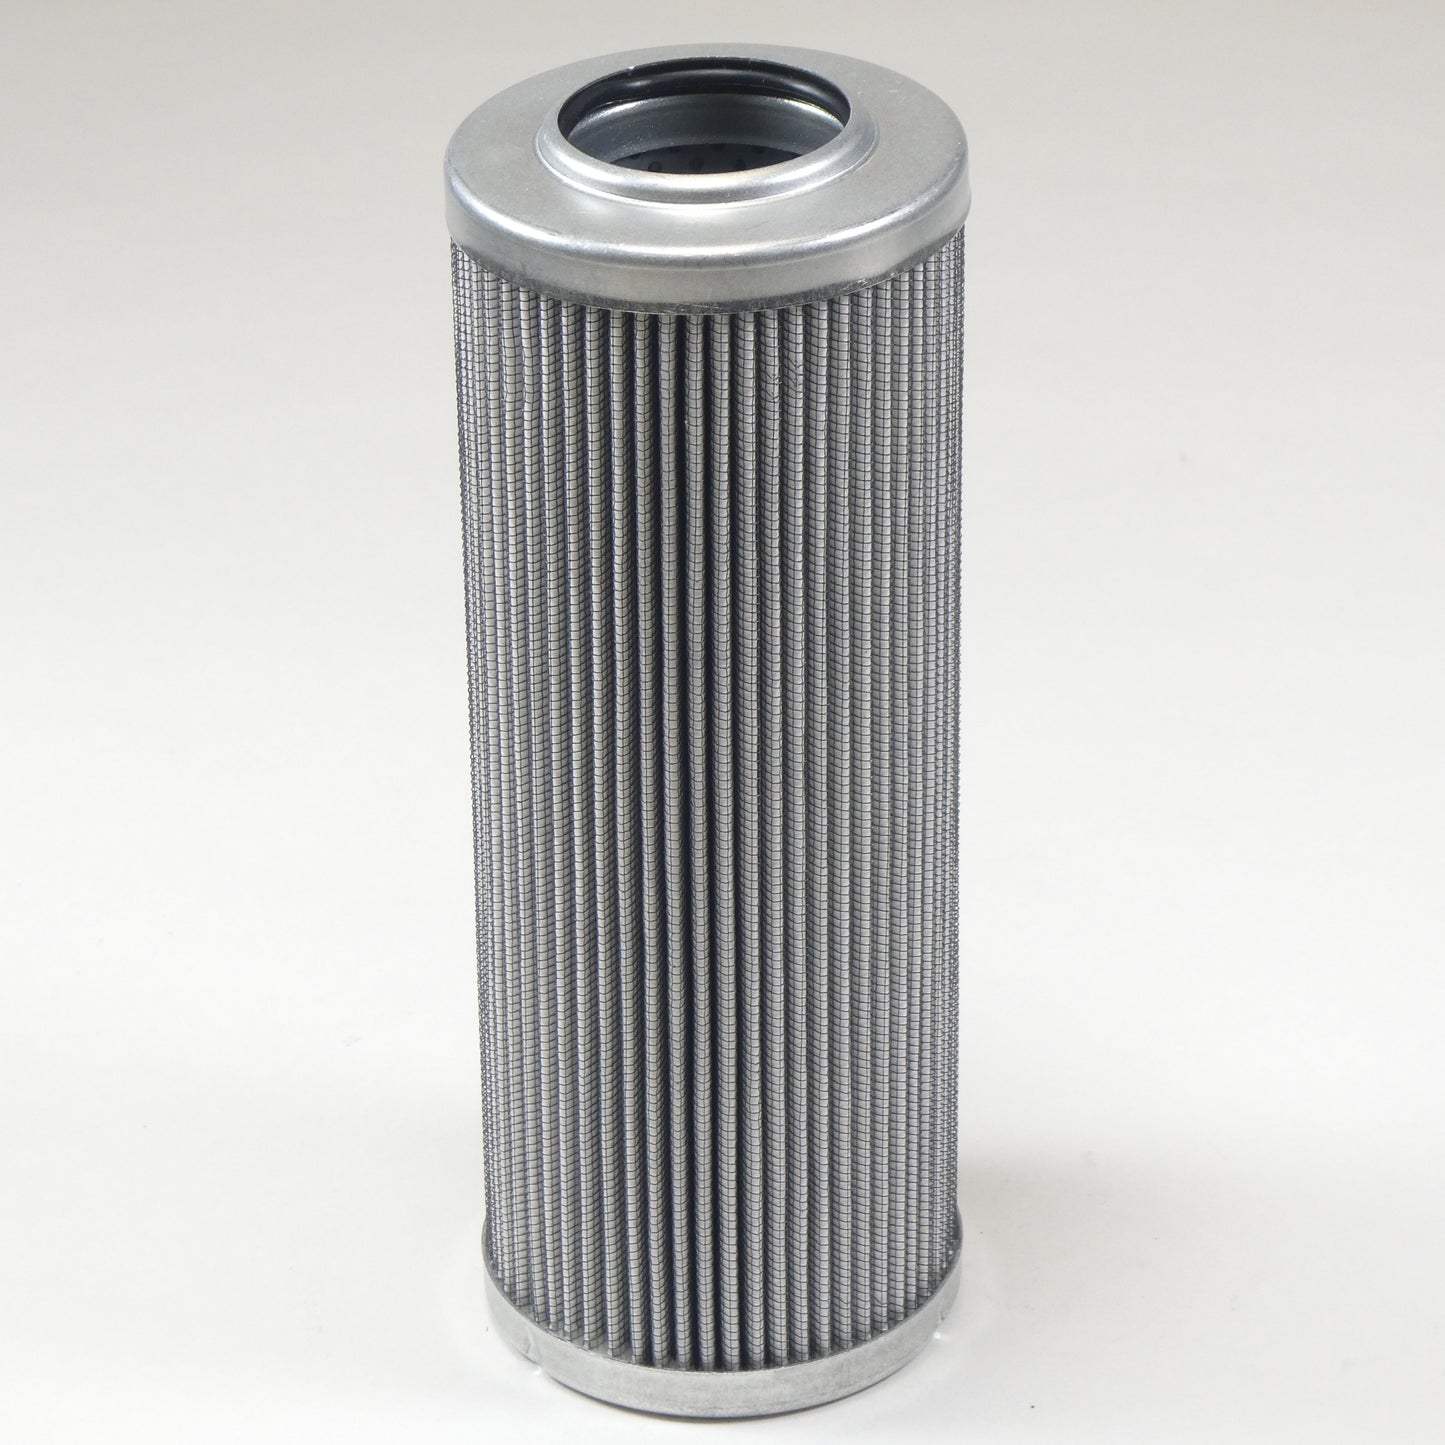 Hydrafil Replacement Filter Element for Hilco 3830-16-026-C